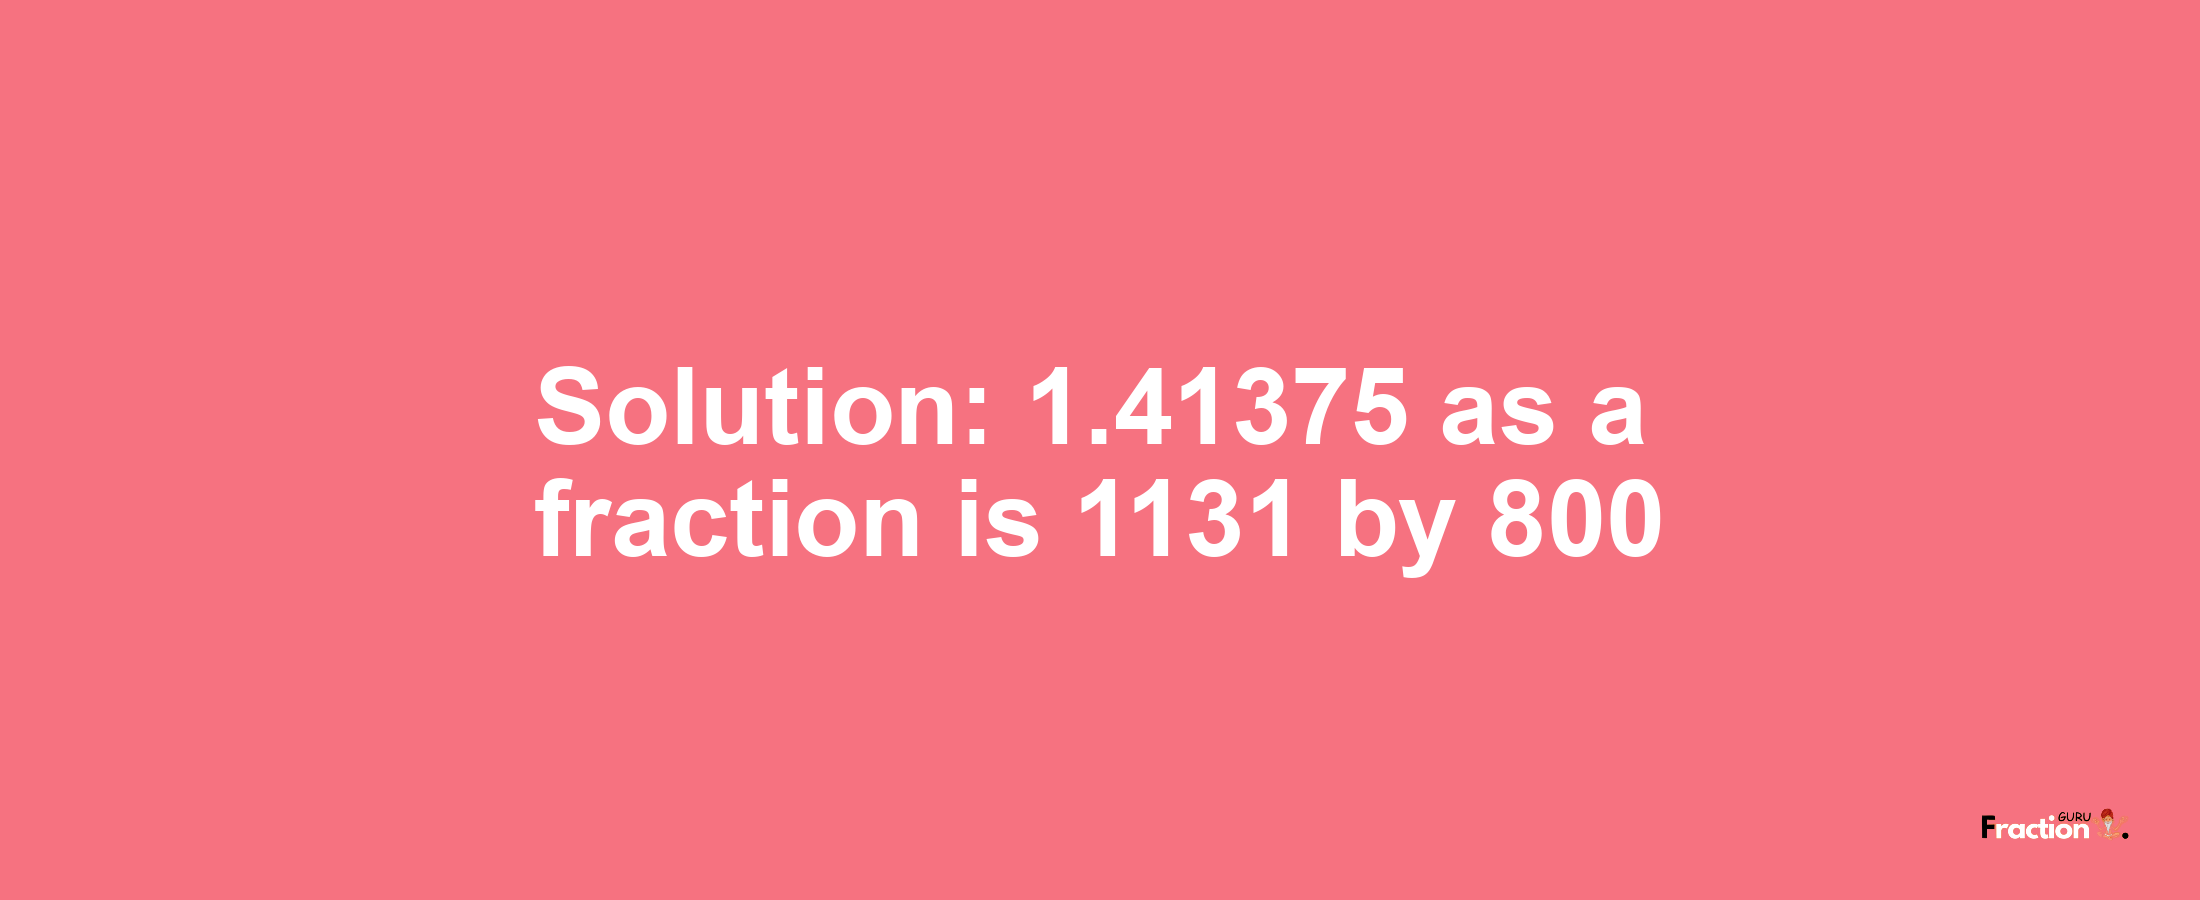 Solution:1.41375 as a fraction is 1131/800